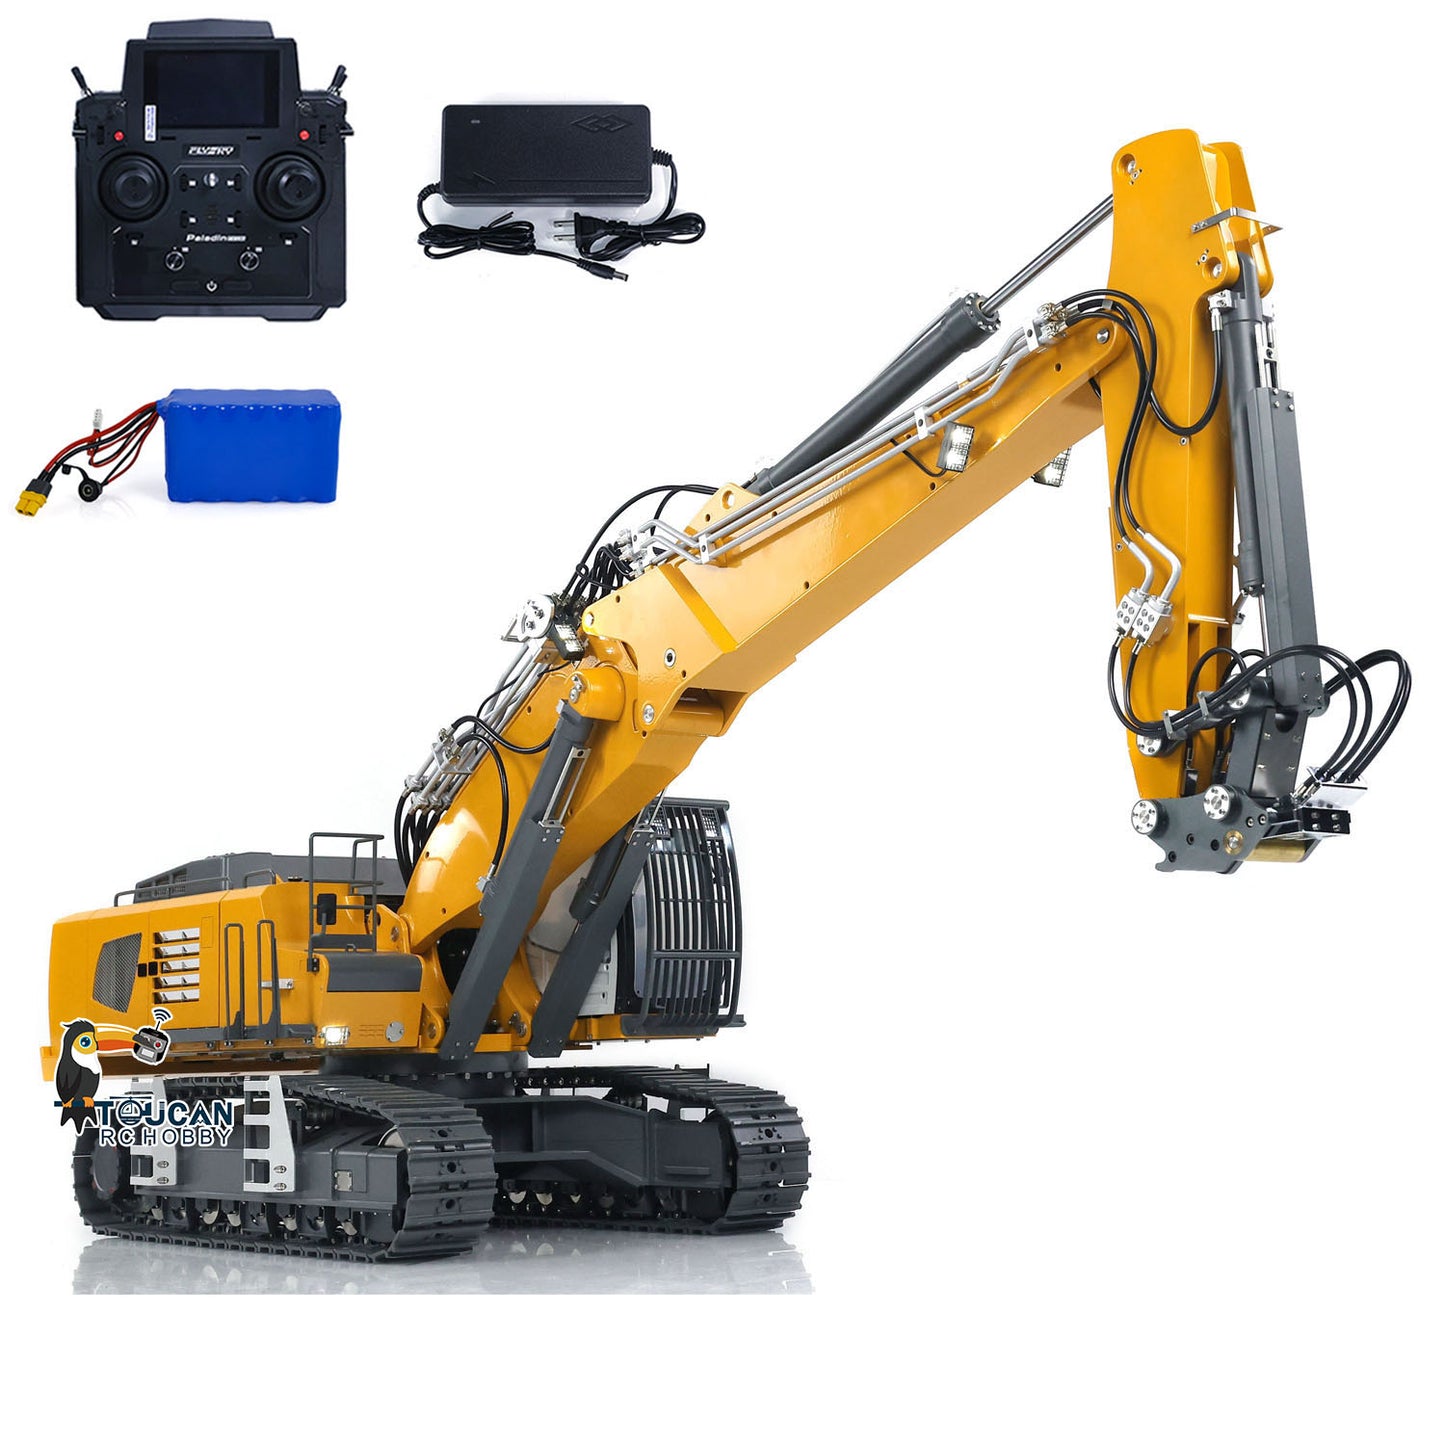 IN STOCK 1/14 CUT K970-301 RC Hydraulic Excavator PL18EV Lite Remote Control Digger Model Ready to Run Painted Assembled Cars